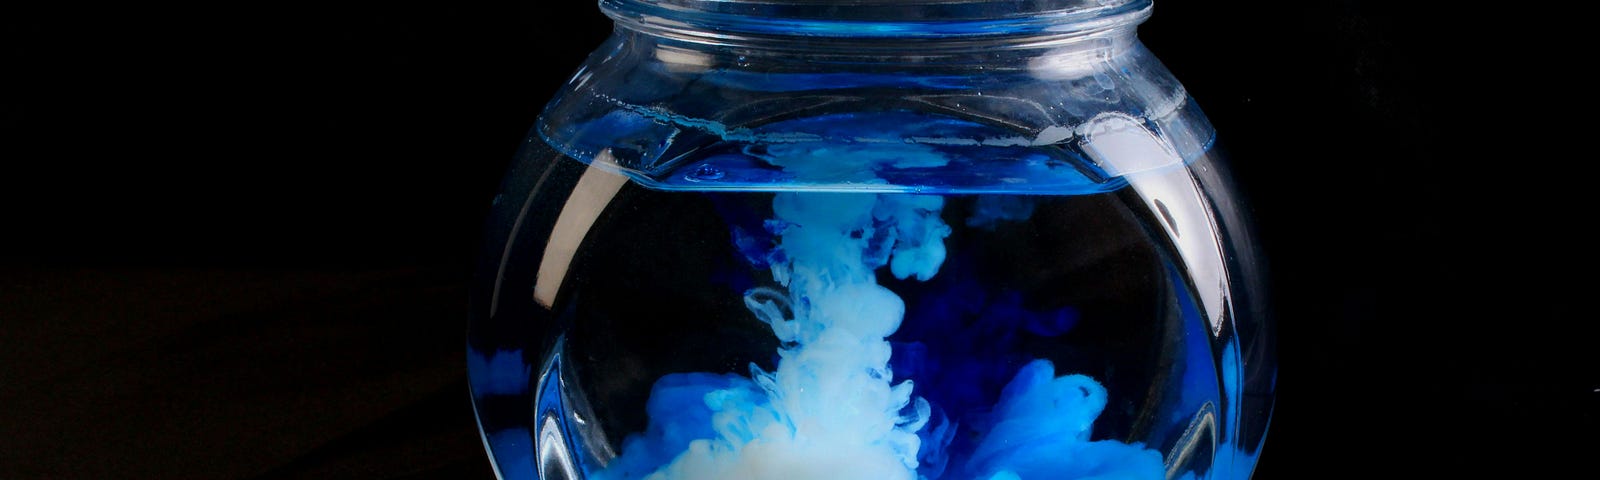 Bulbous glass filled with water in which blue color that slowly dissolves.